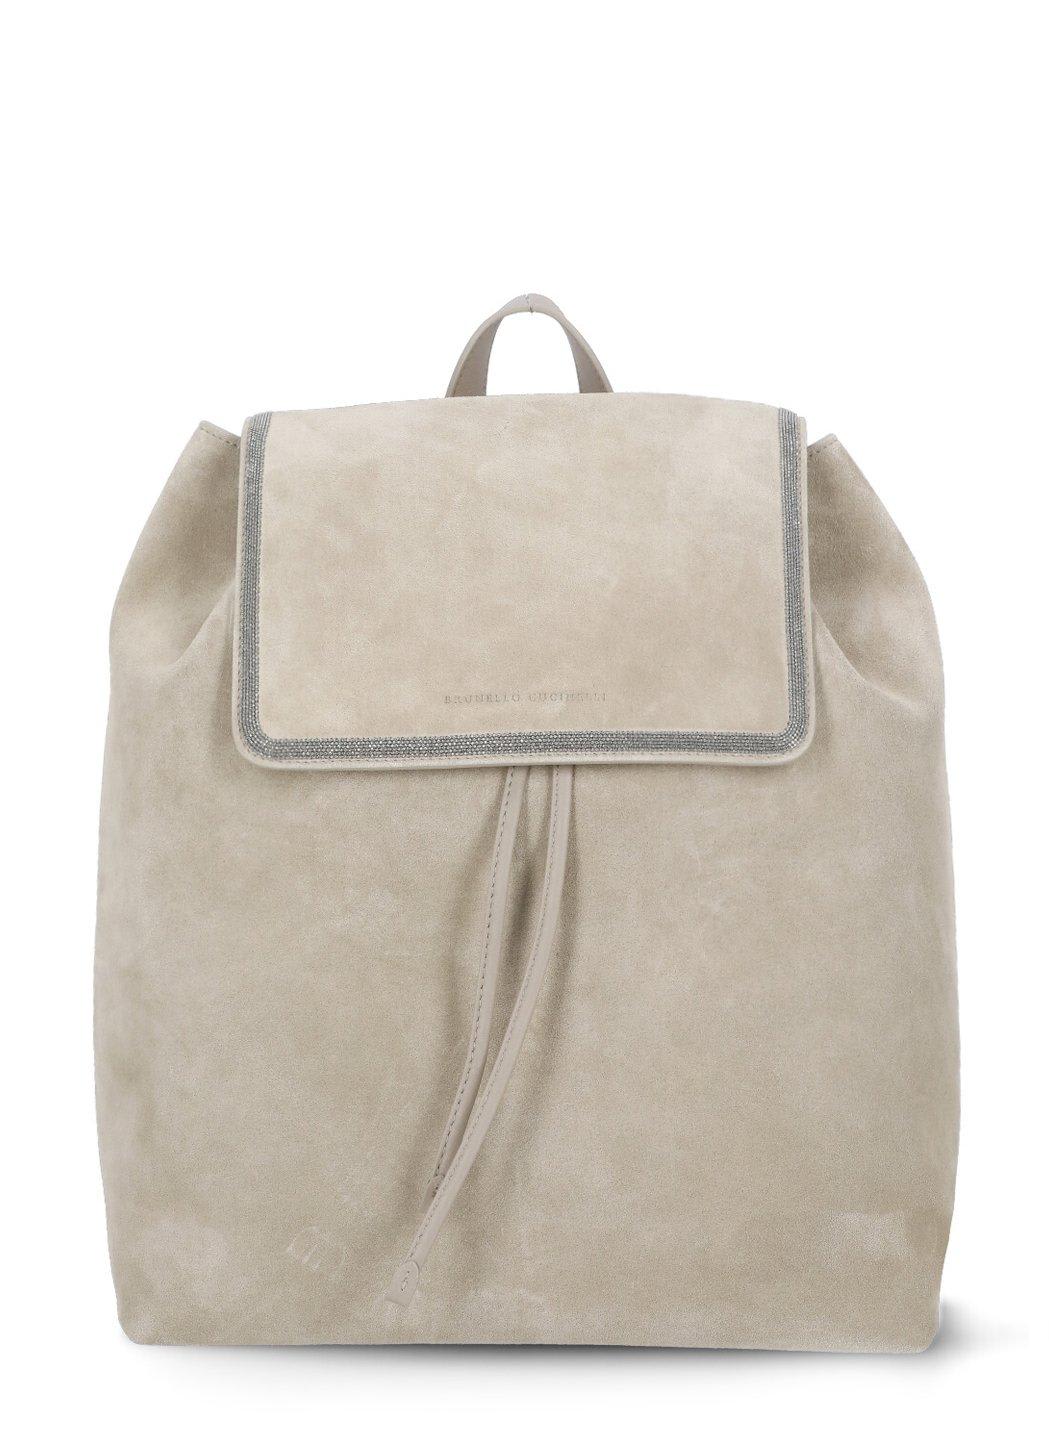 Brunello Cucinelli Drawstring Top-handle Backpack